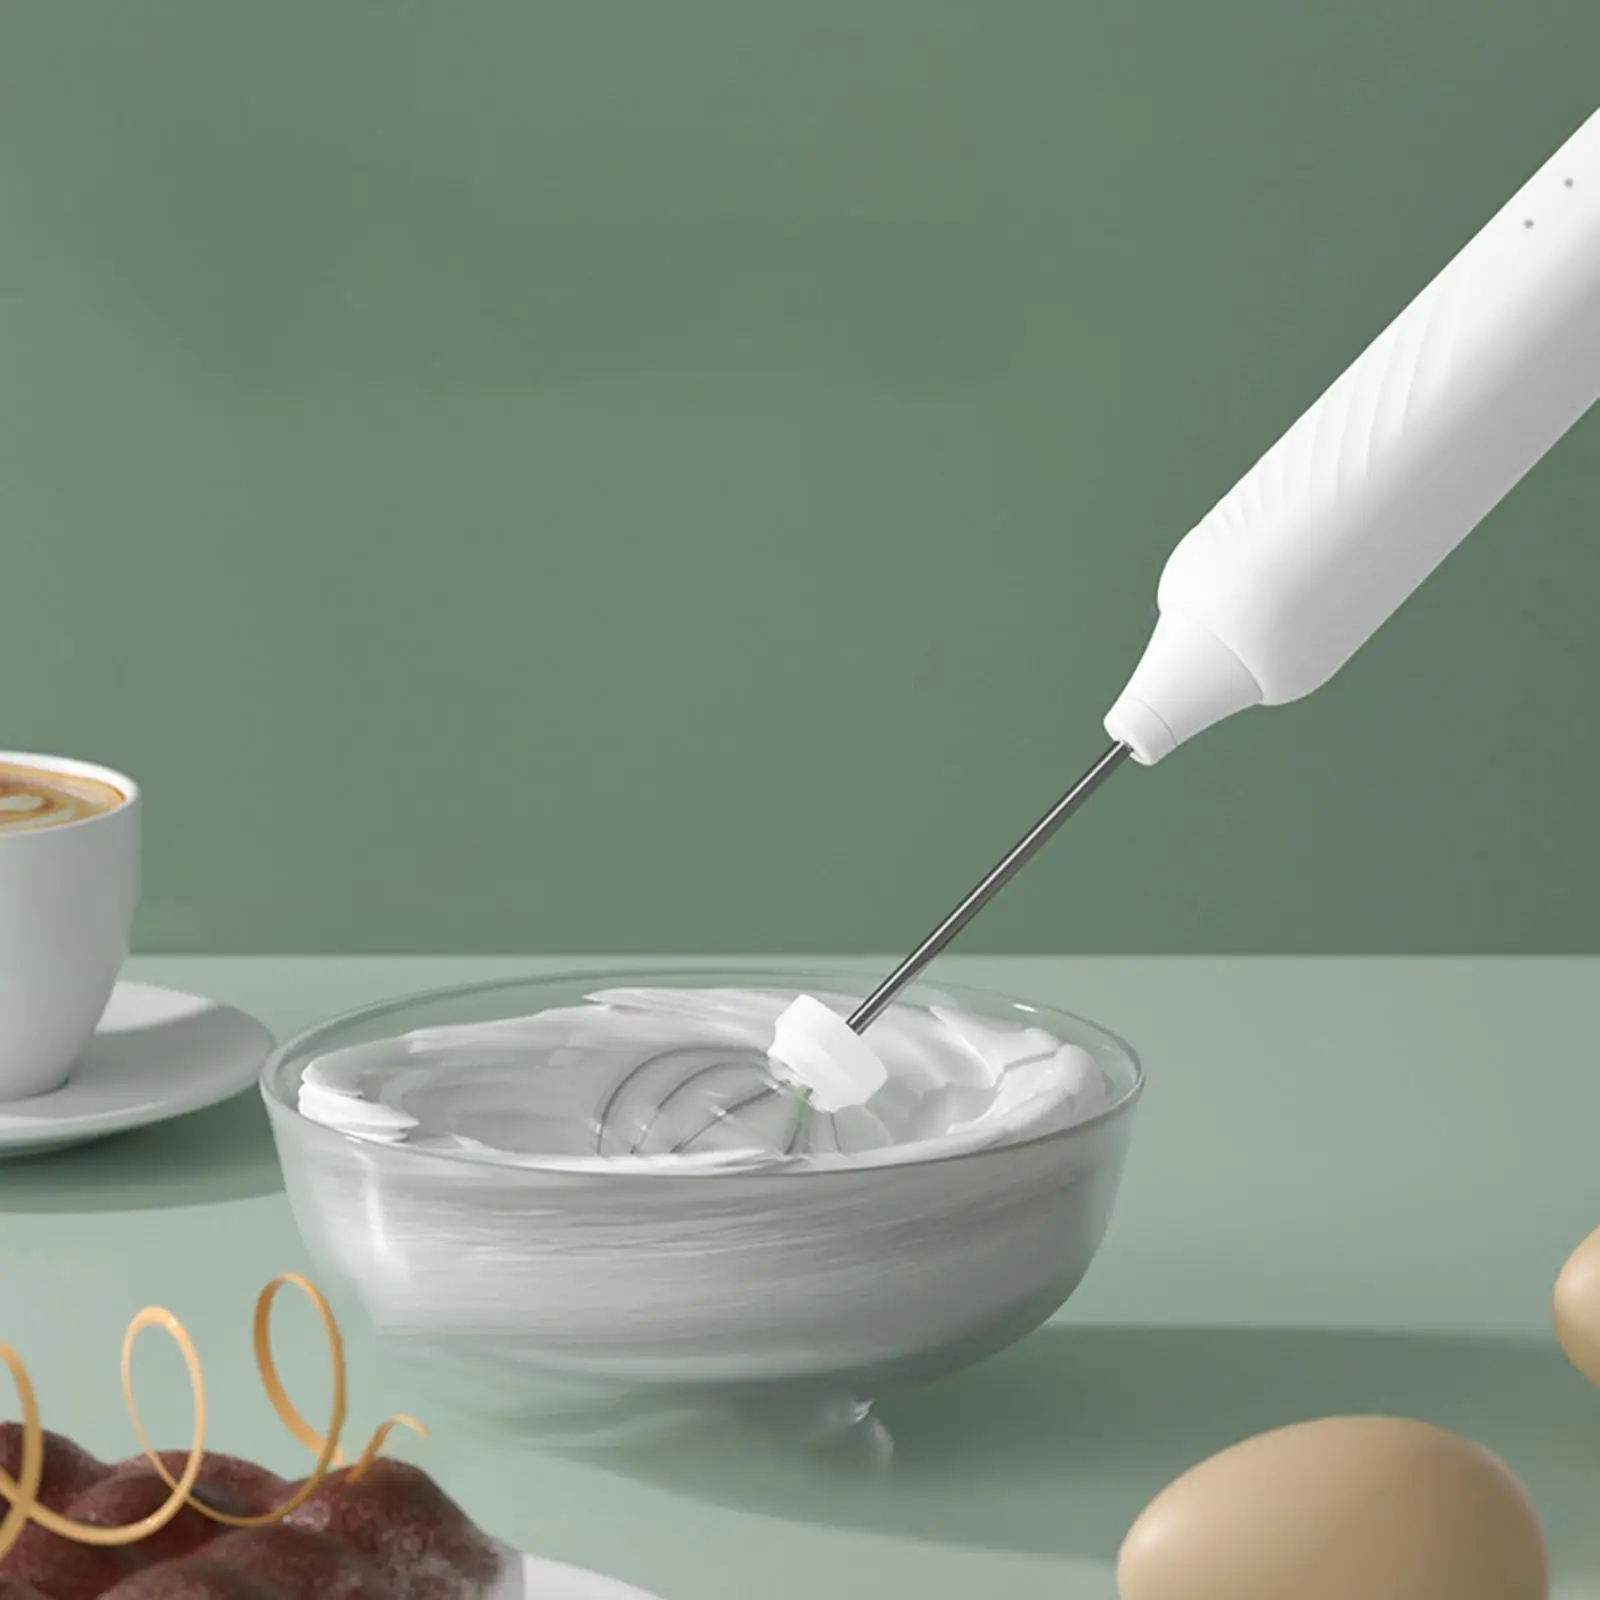 Handheld Milk Frother Egg Beater Adjustable Speed Cordless Cream Mixer for Baking